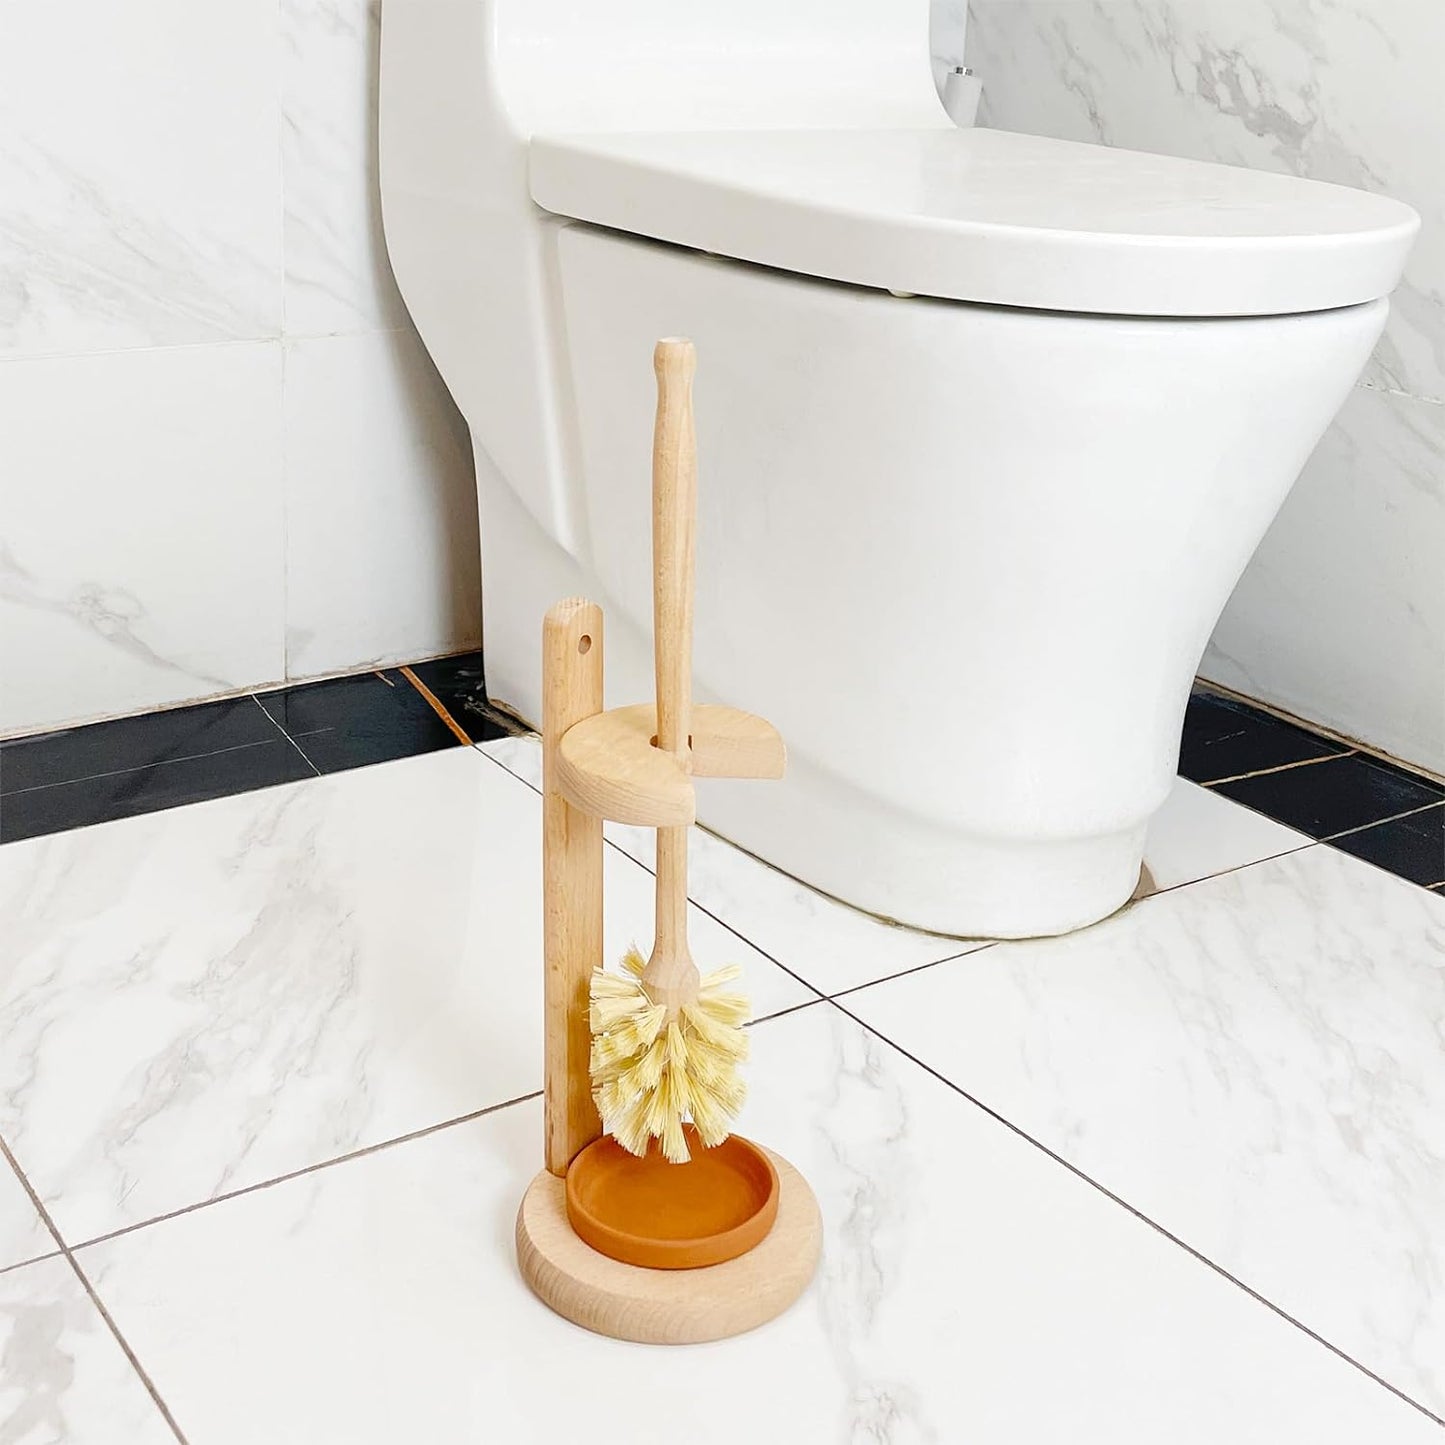 Wood Toilet Brush and Holder Set, Beechwood Toilet Bowl Cleaner Brush for Bathroom, Natural Sisal Bristles Toilet Scrubber with Stand